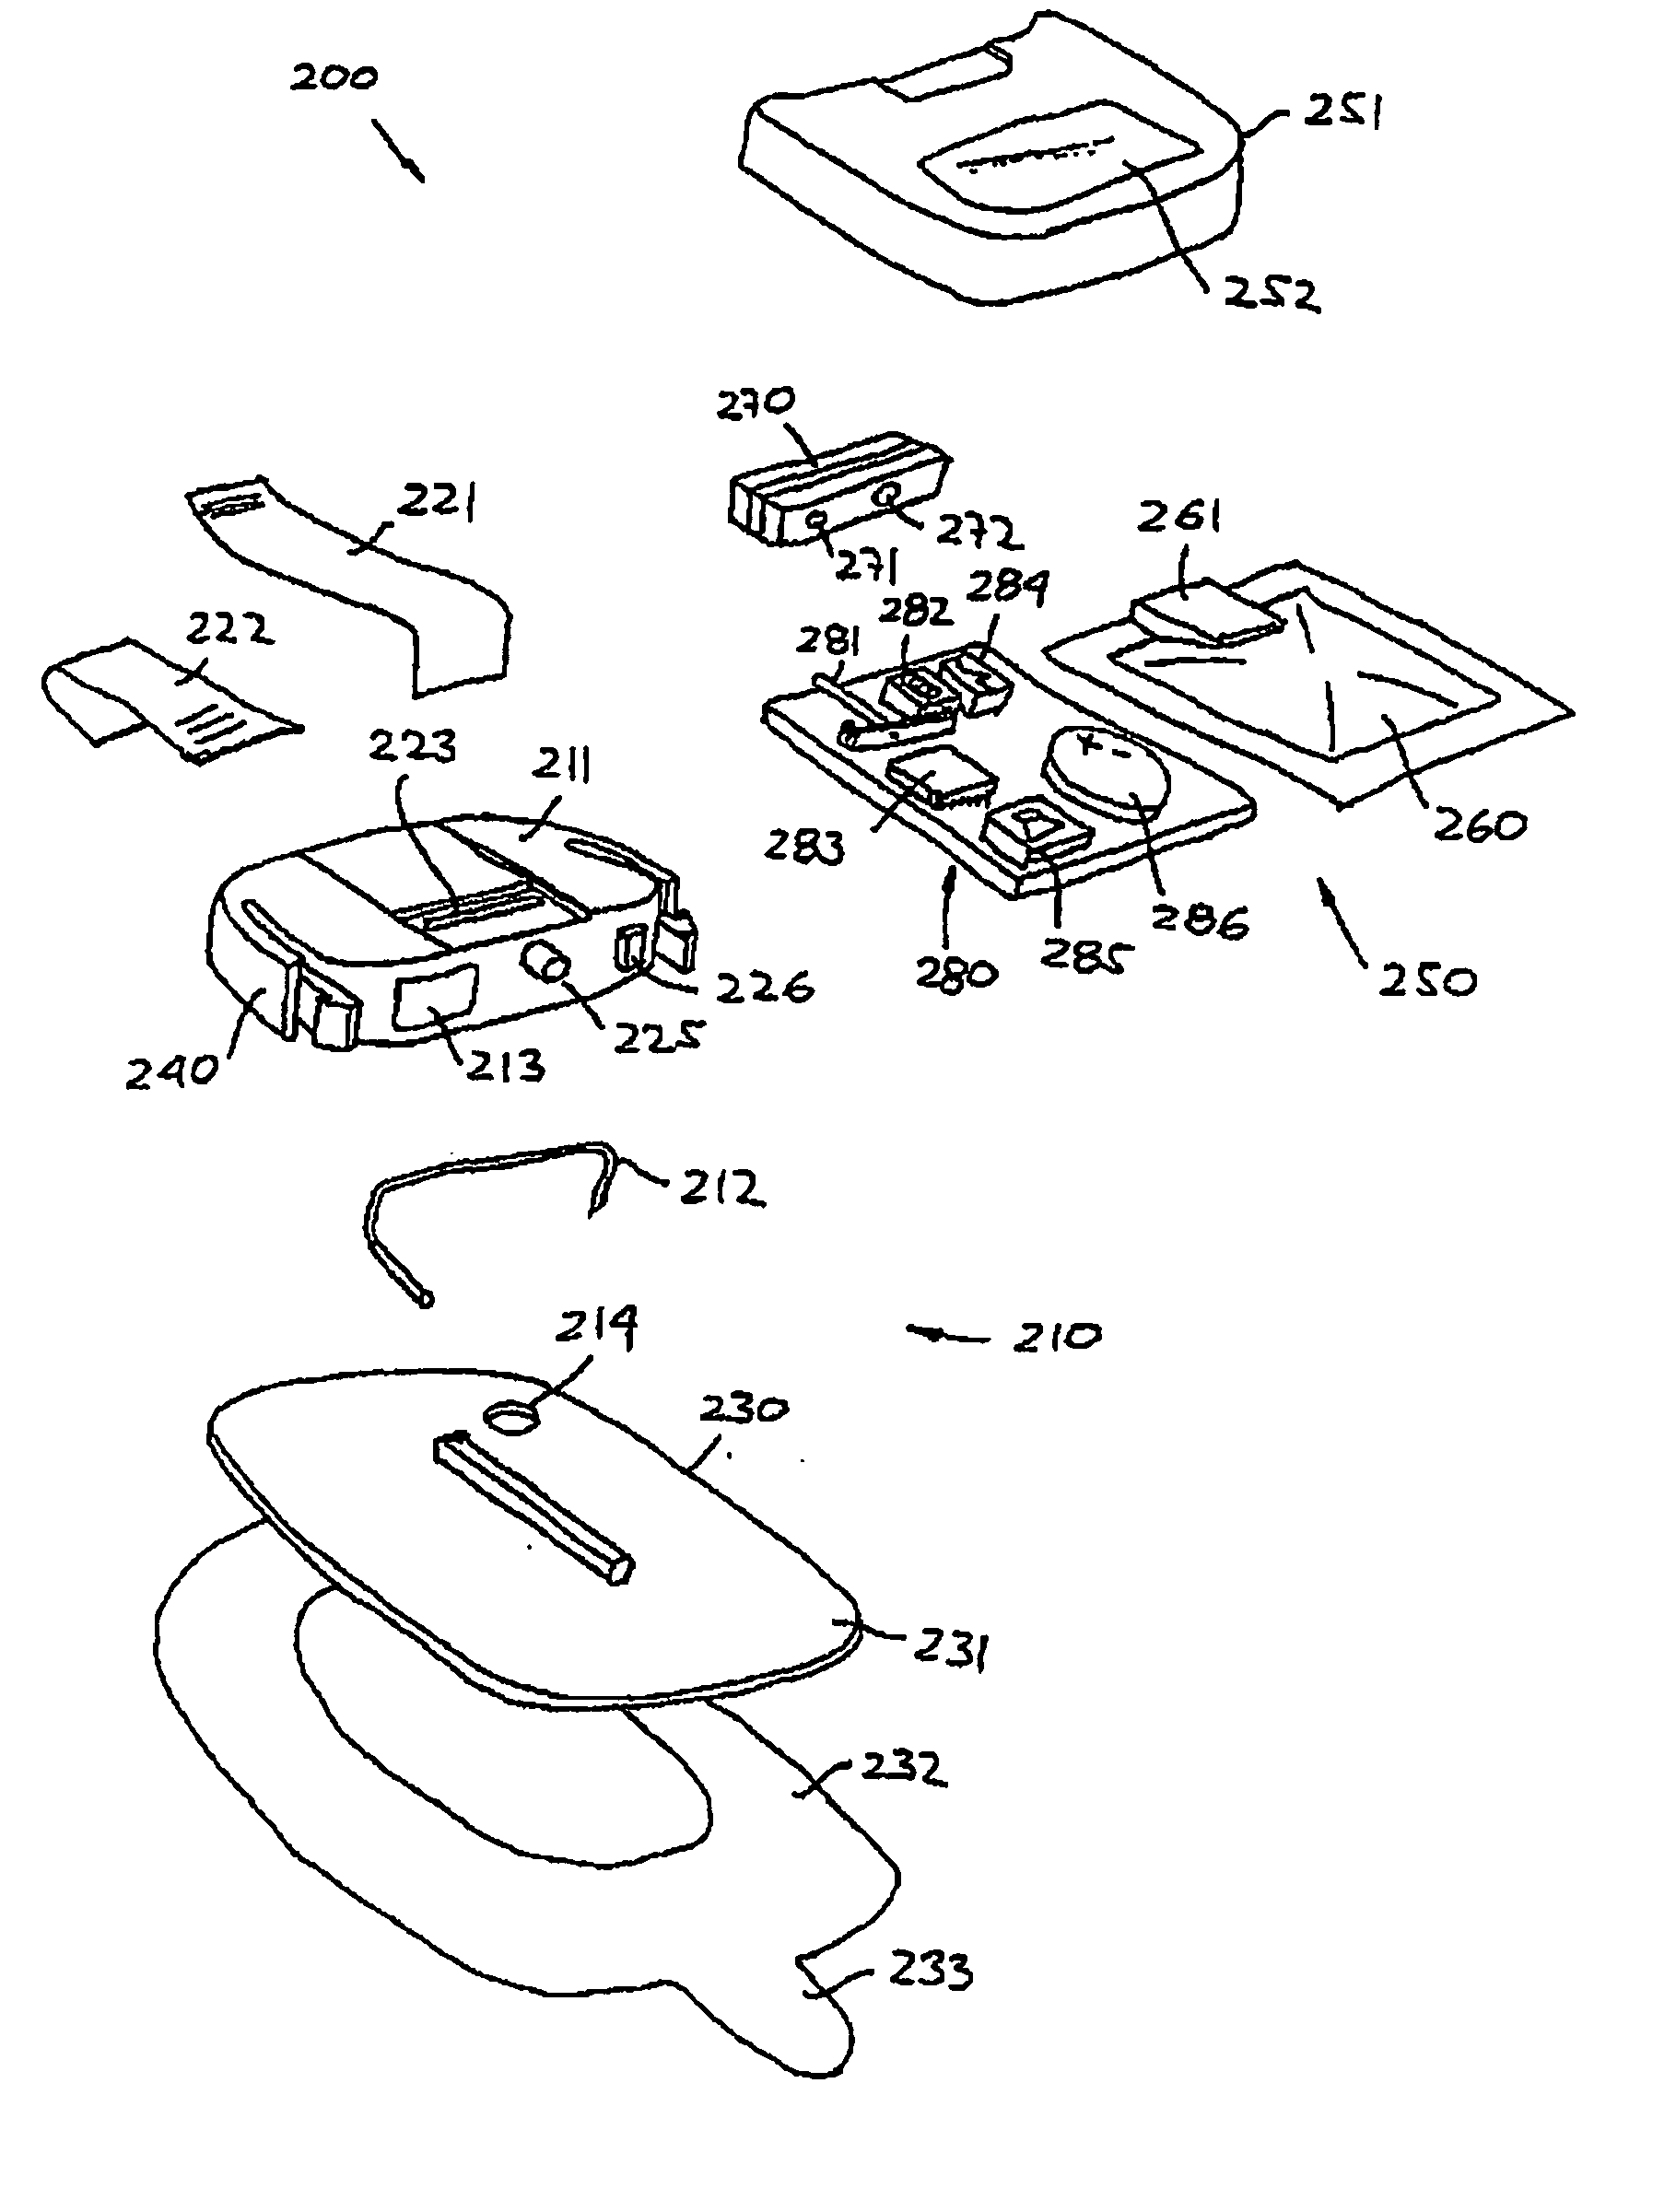 Reservoir device with integrated mounting means